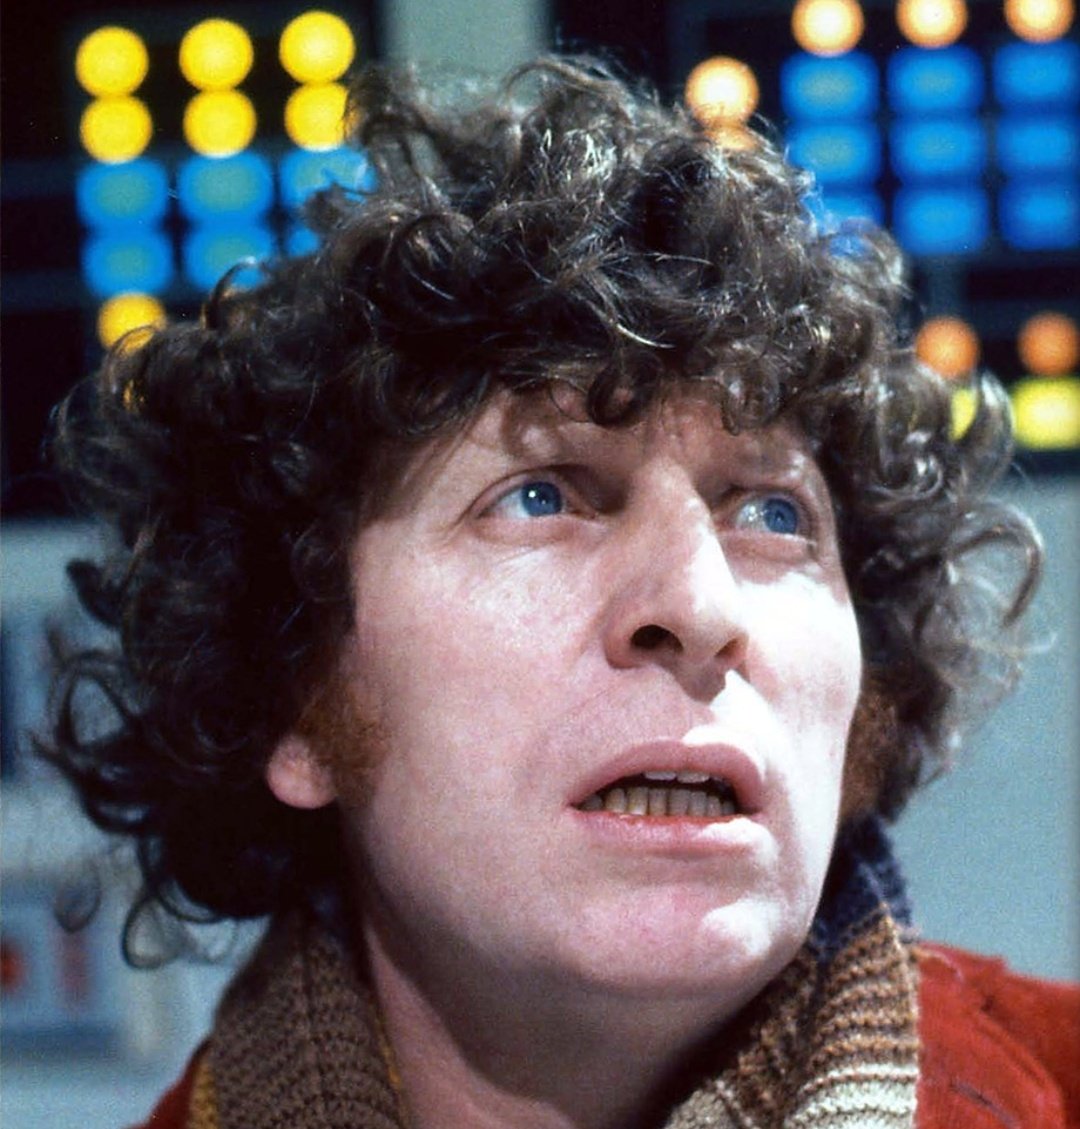 Tom Baker during 'The Ark in Space'. #TomBaker #DoctorWho #FourthDoctor